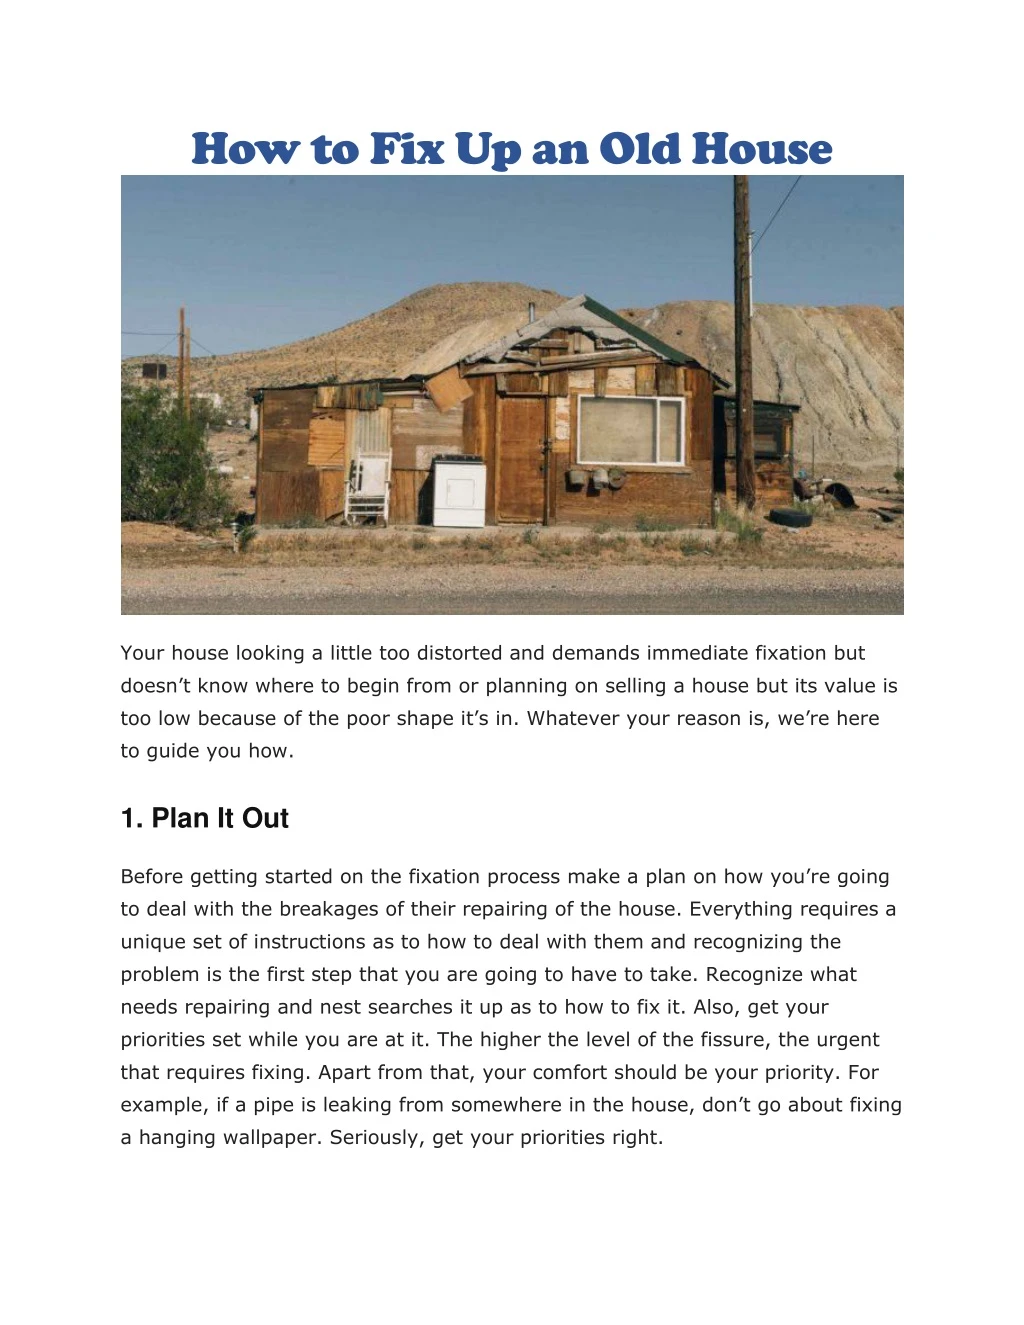 how to fix up an old house